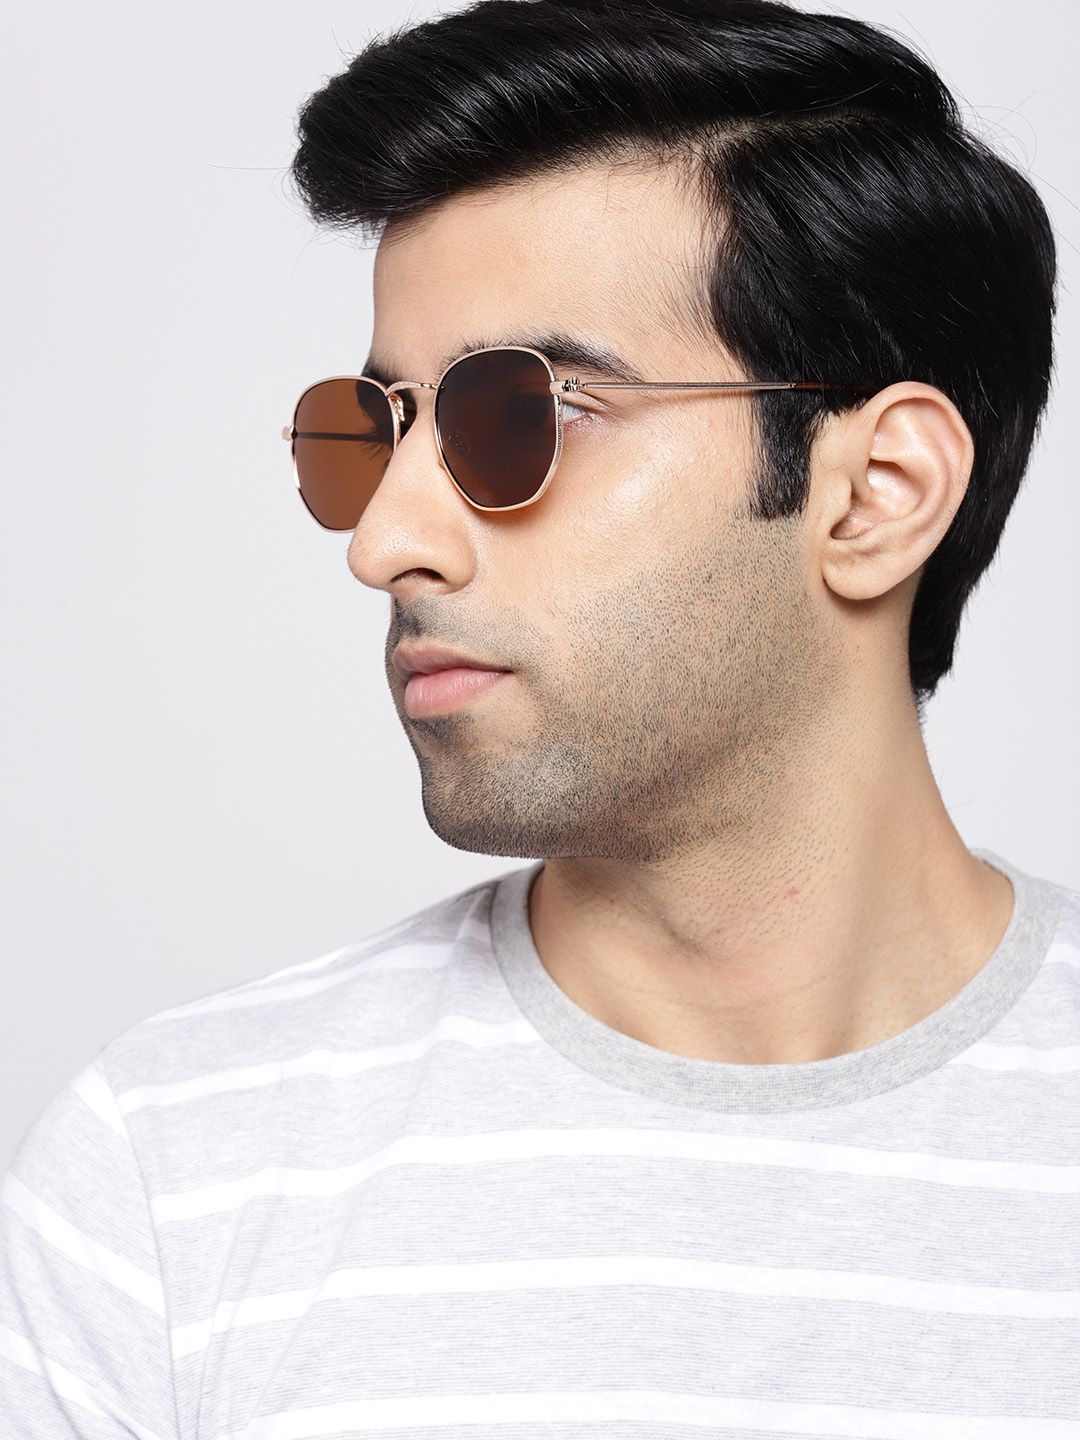 The Roadster Lifestyle Co Unisex Oval Sunglasses MFB-PN-PS-T9336 Price in India